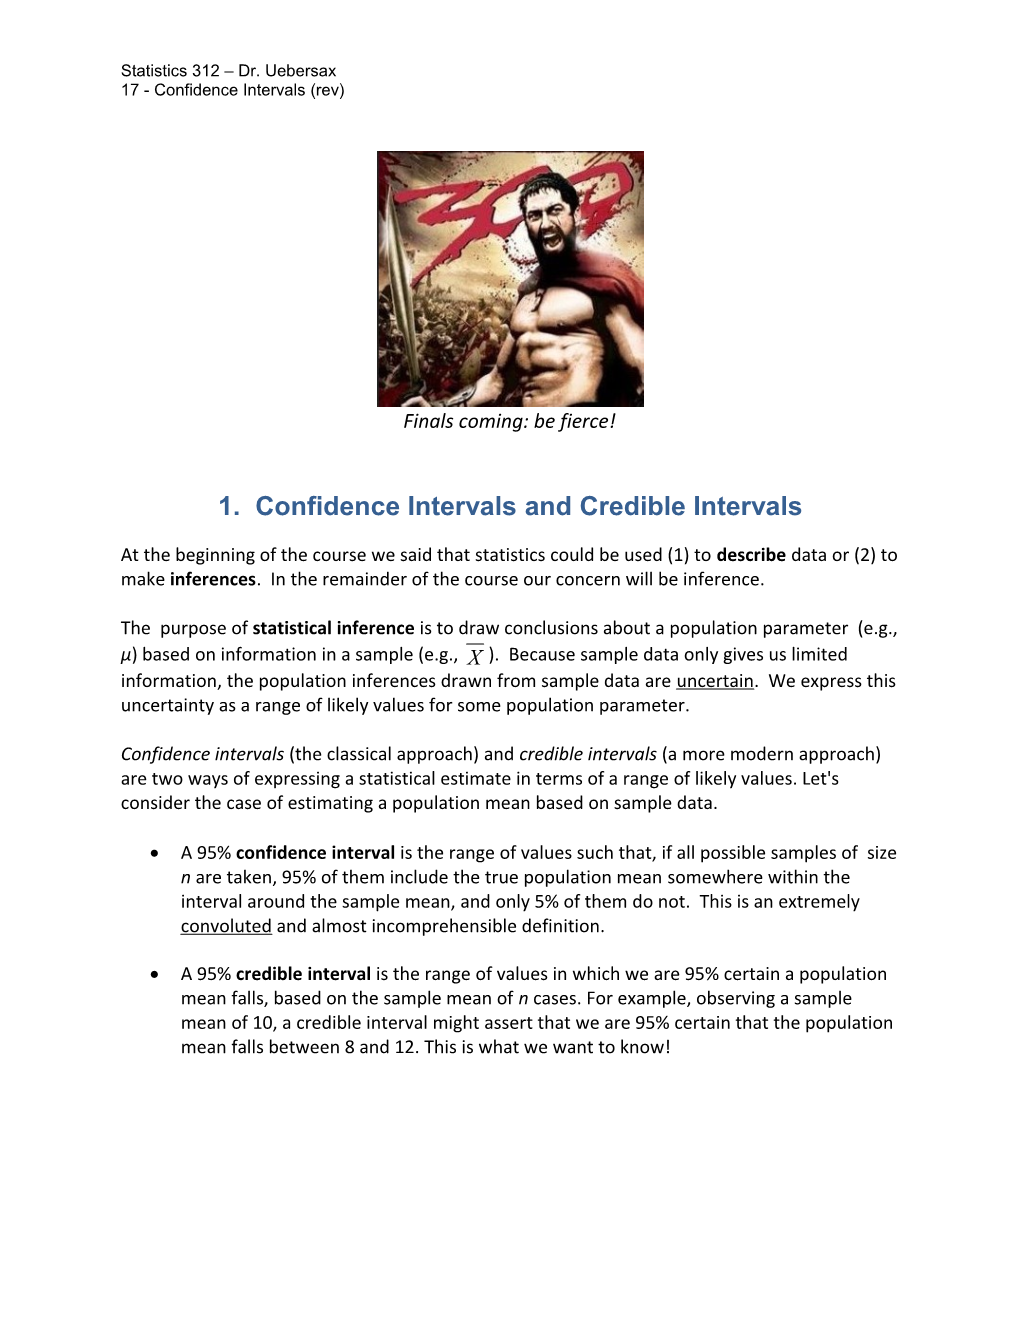 1. Confidence Intervals and Credible Intervals